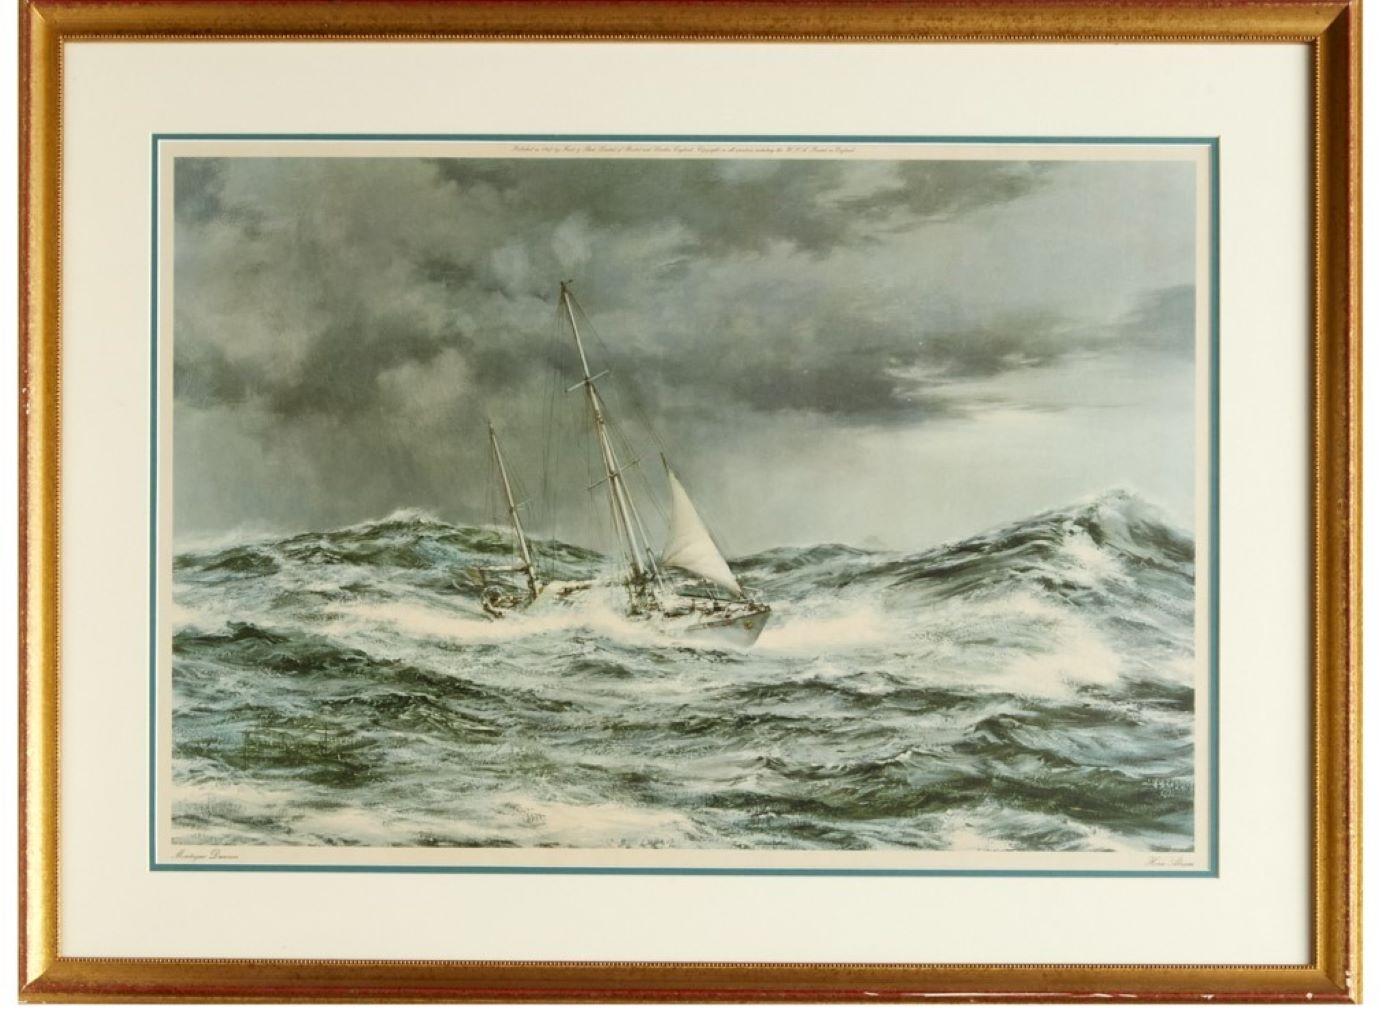 After Montague Dawson (British, 1895-1973), colour lithograph, matted and framed under non-glare glass. 